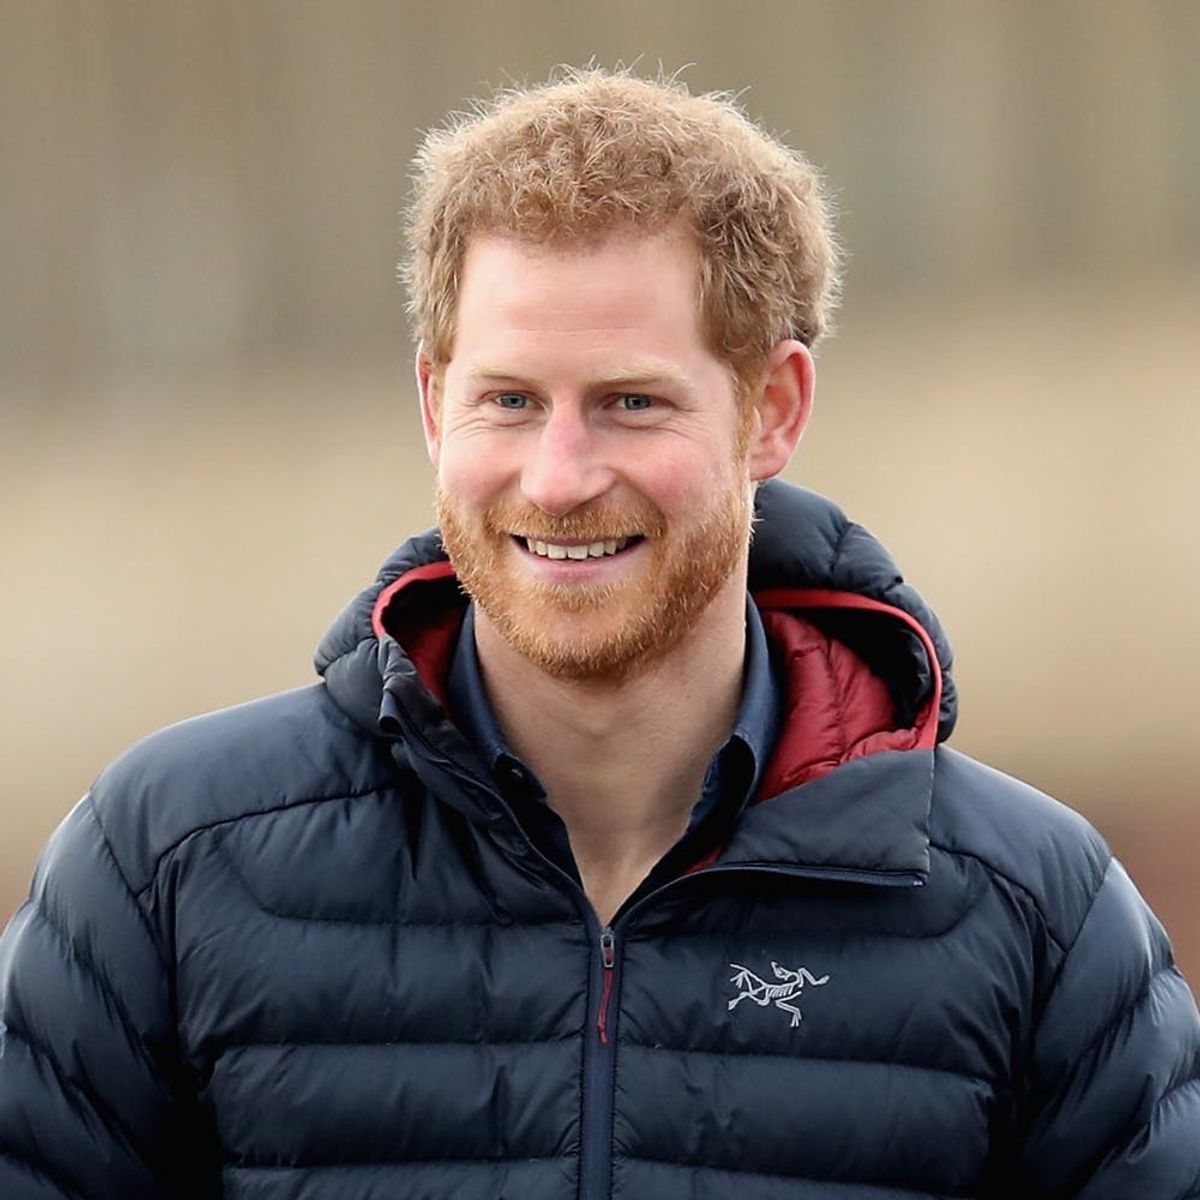 Prince Harry Has Made This Major Grooming Change for Meghan Markle